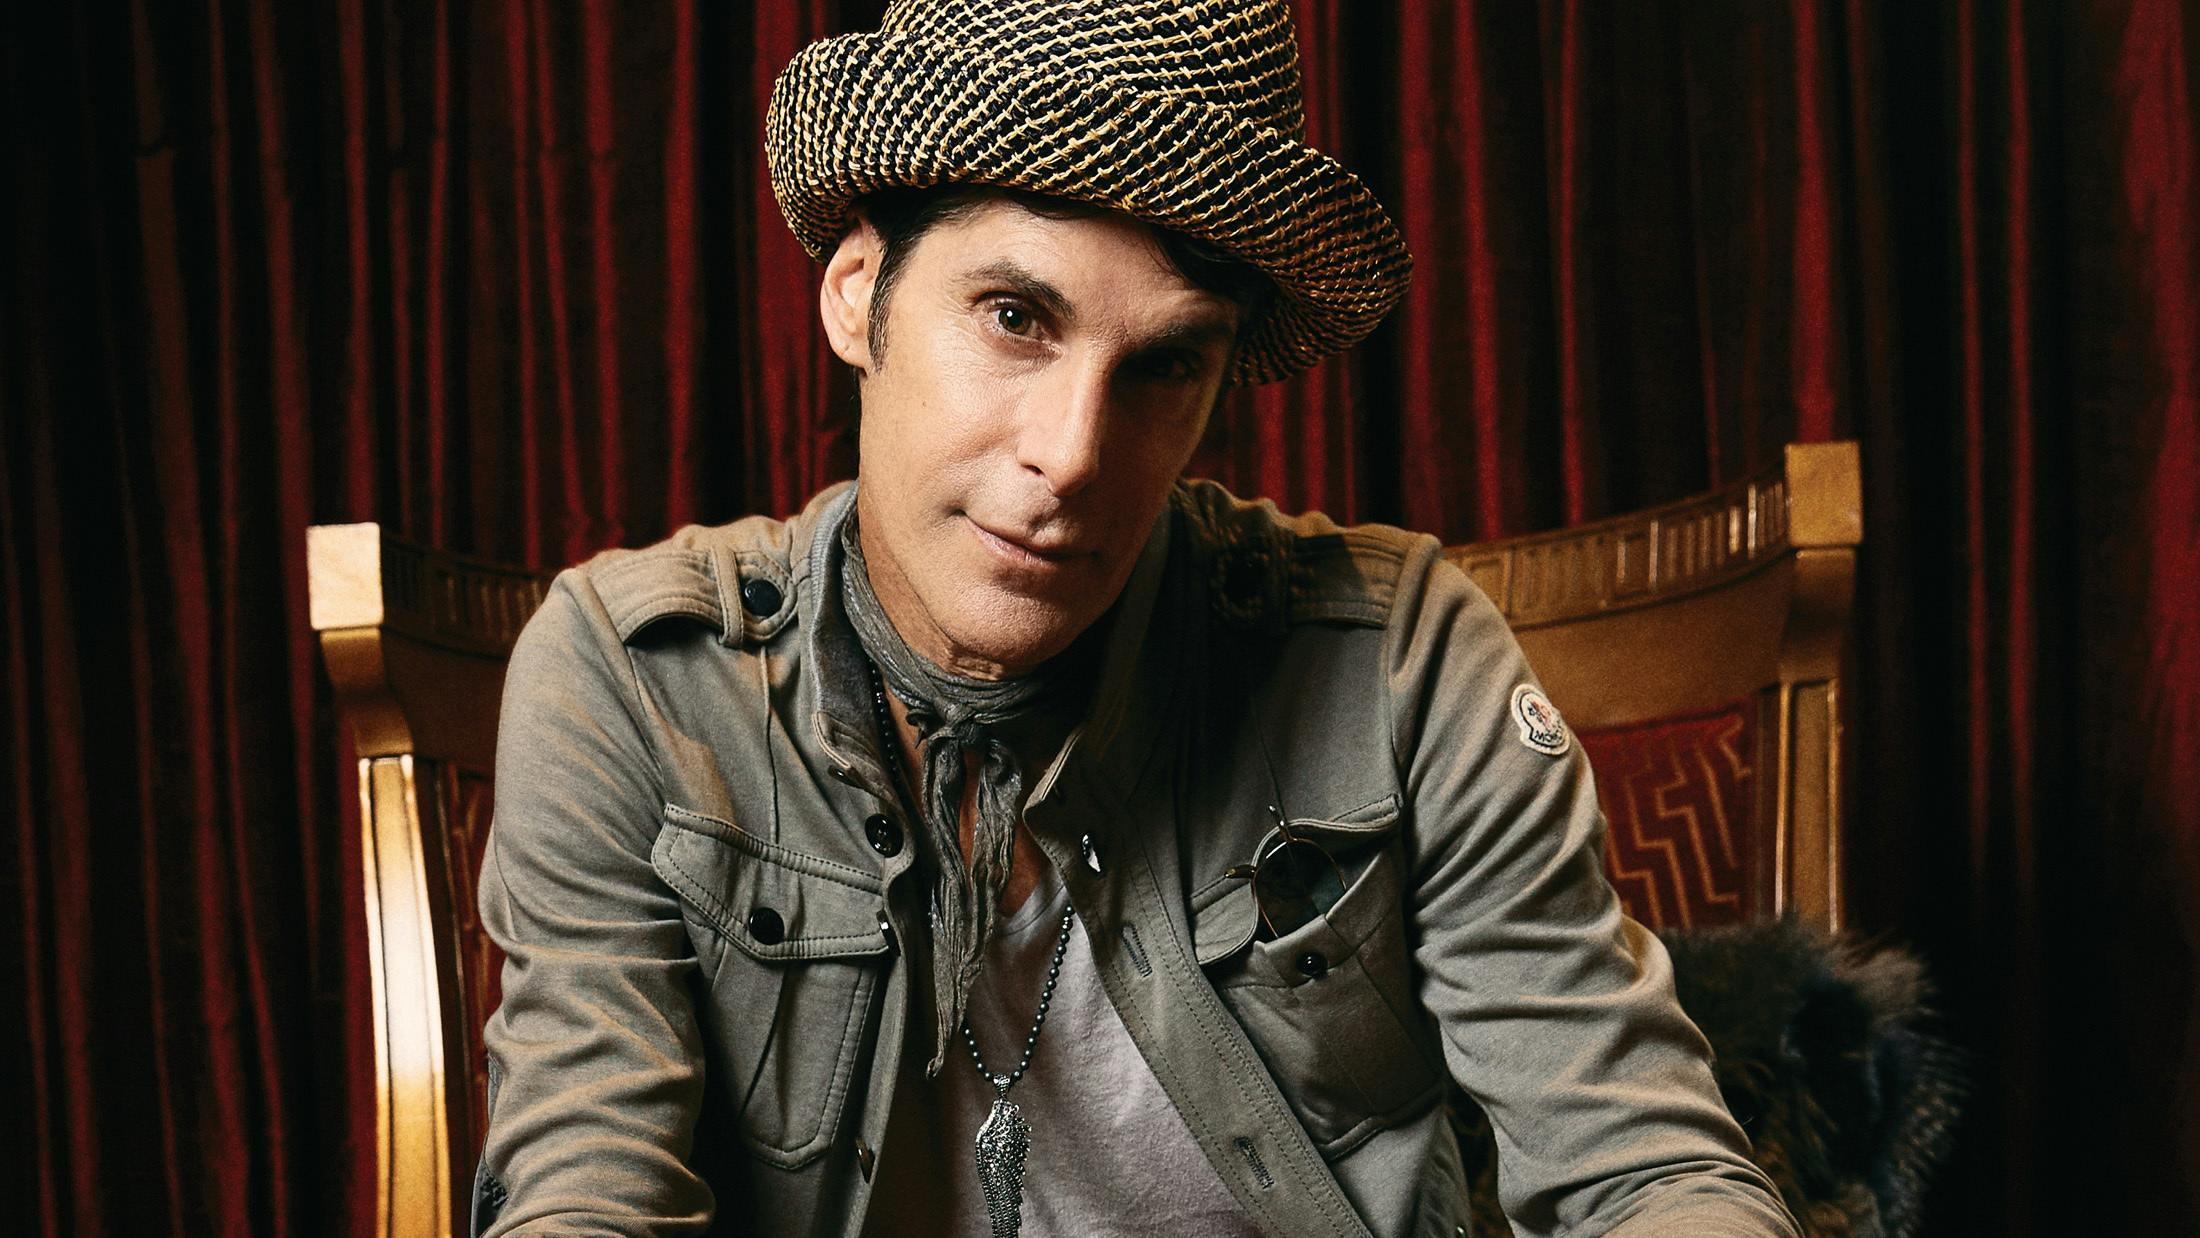 Perry Farrell on being a solutionist, an innovator and that time he freed slaves in Sudan